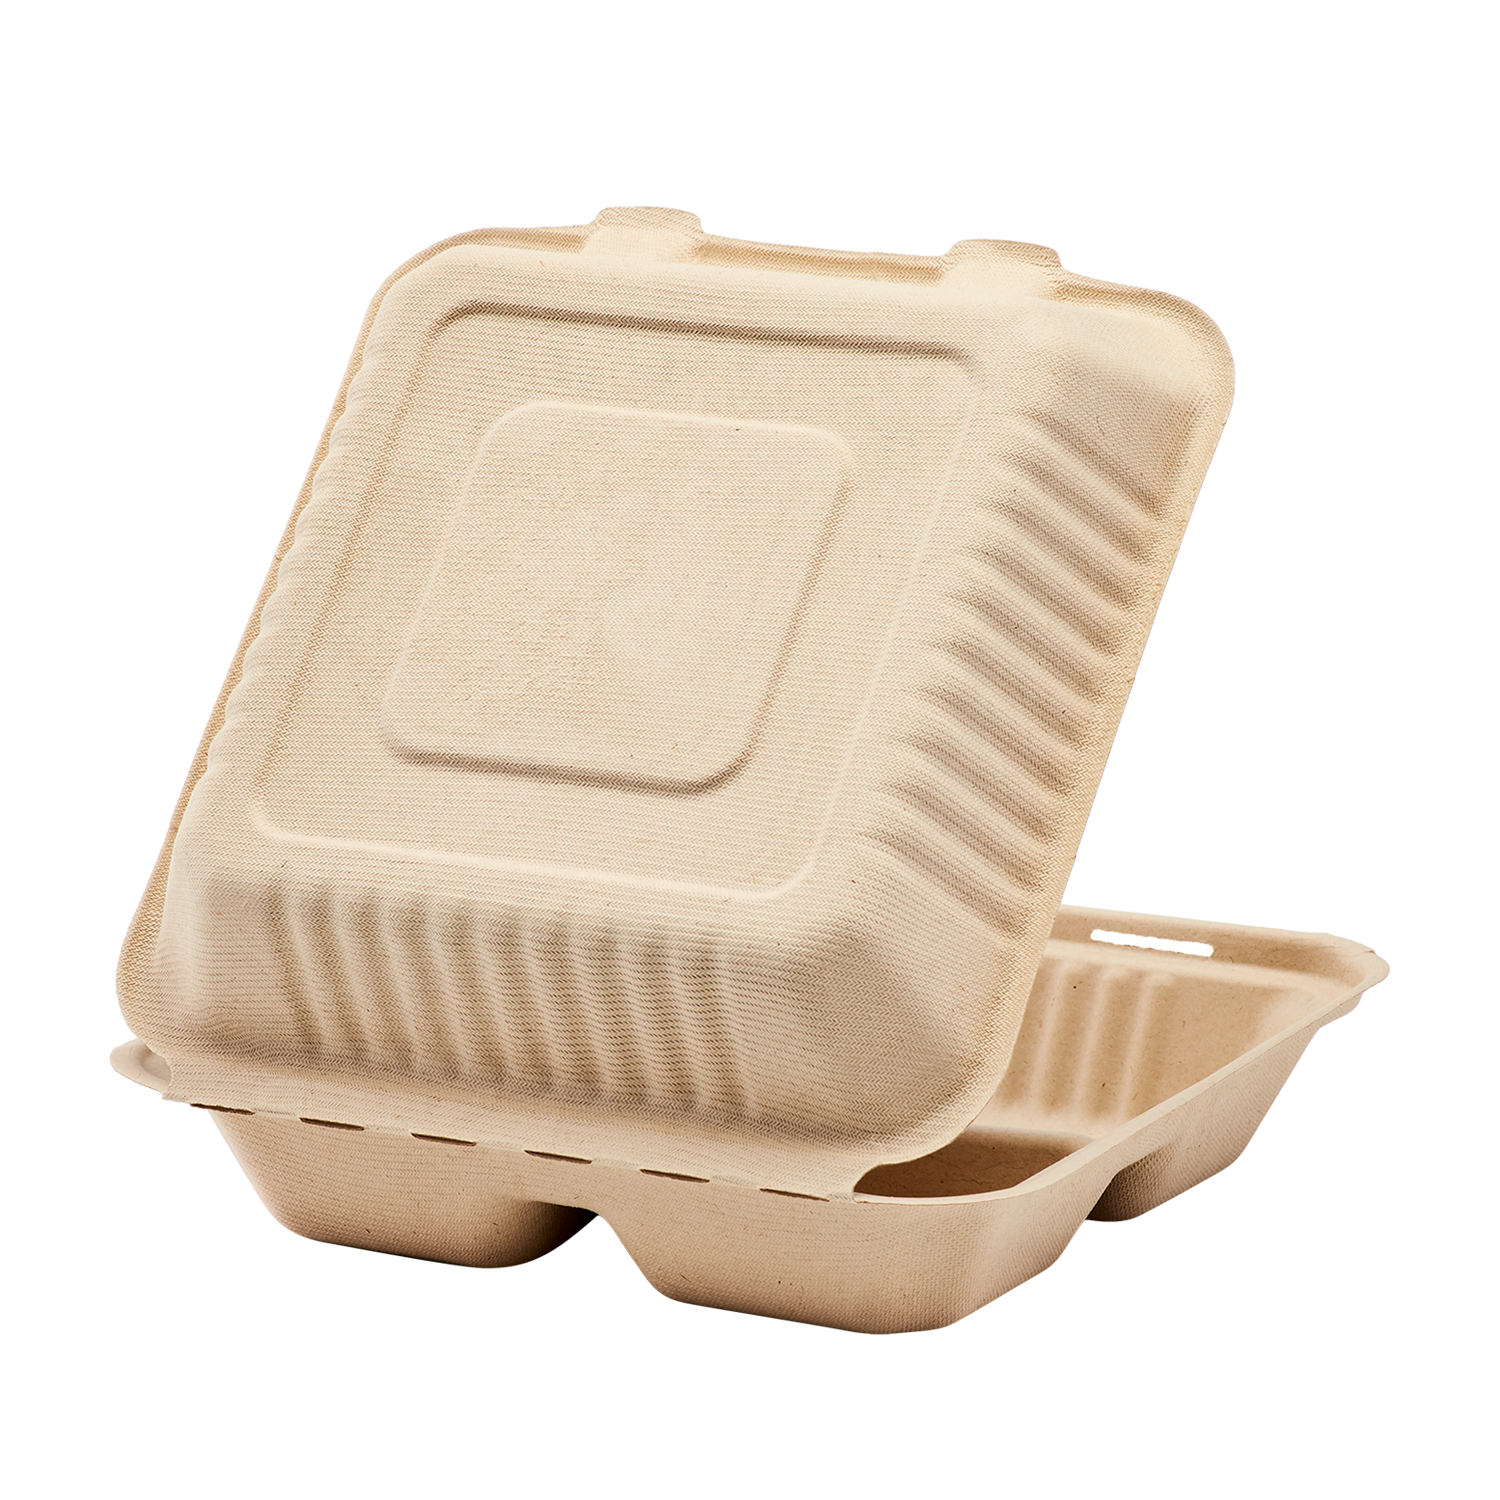 Biodegradable Food Container Eco Friendly Lunch Box Food Storage